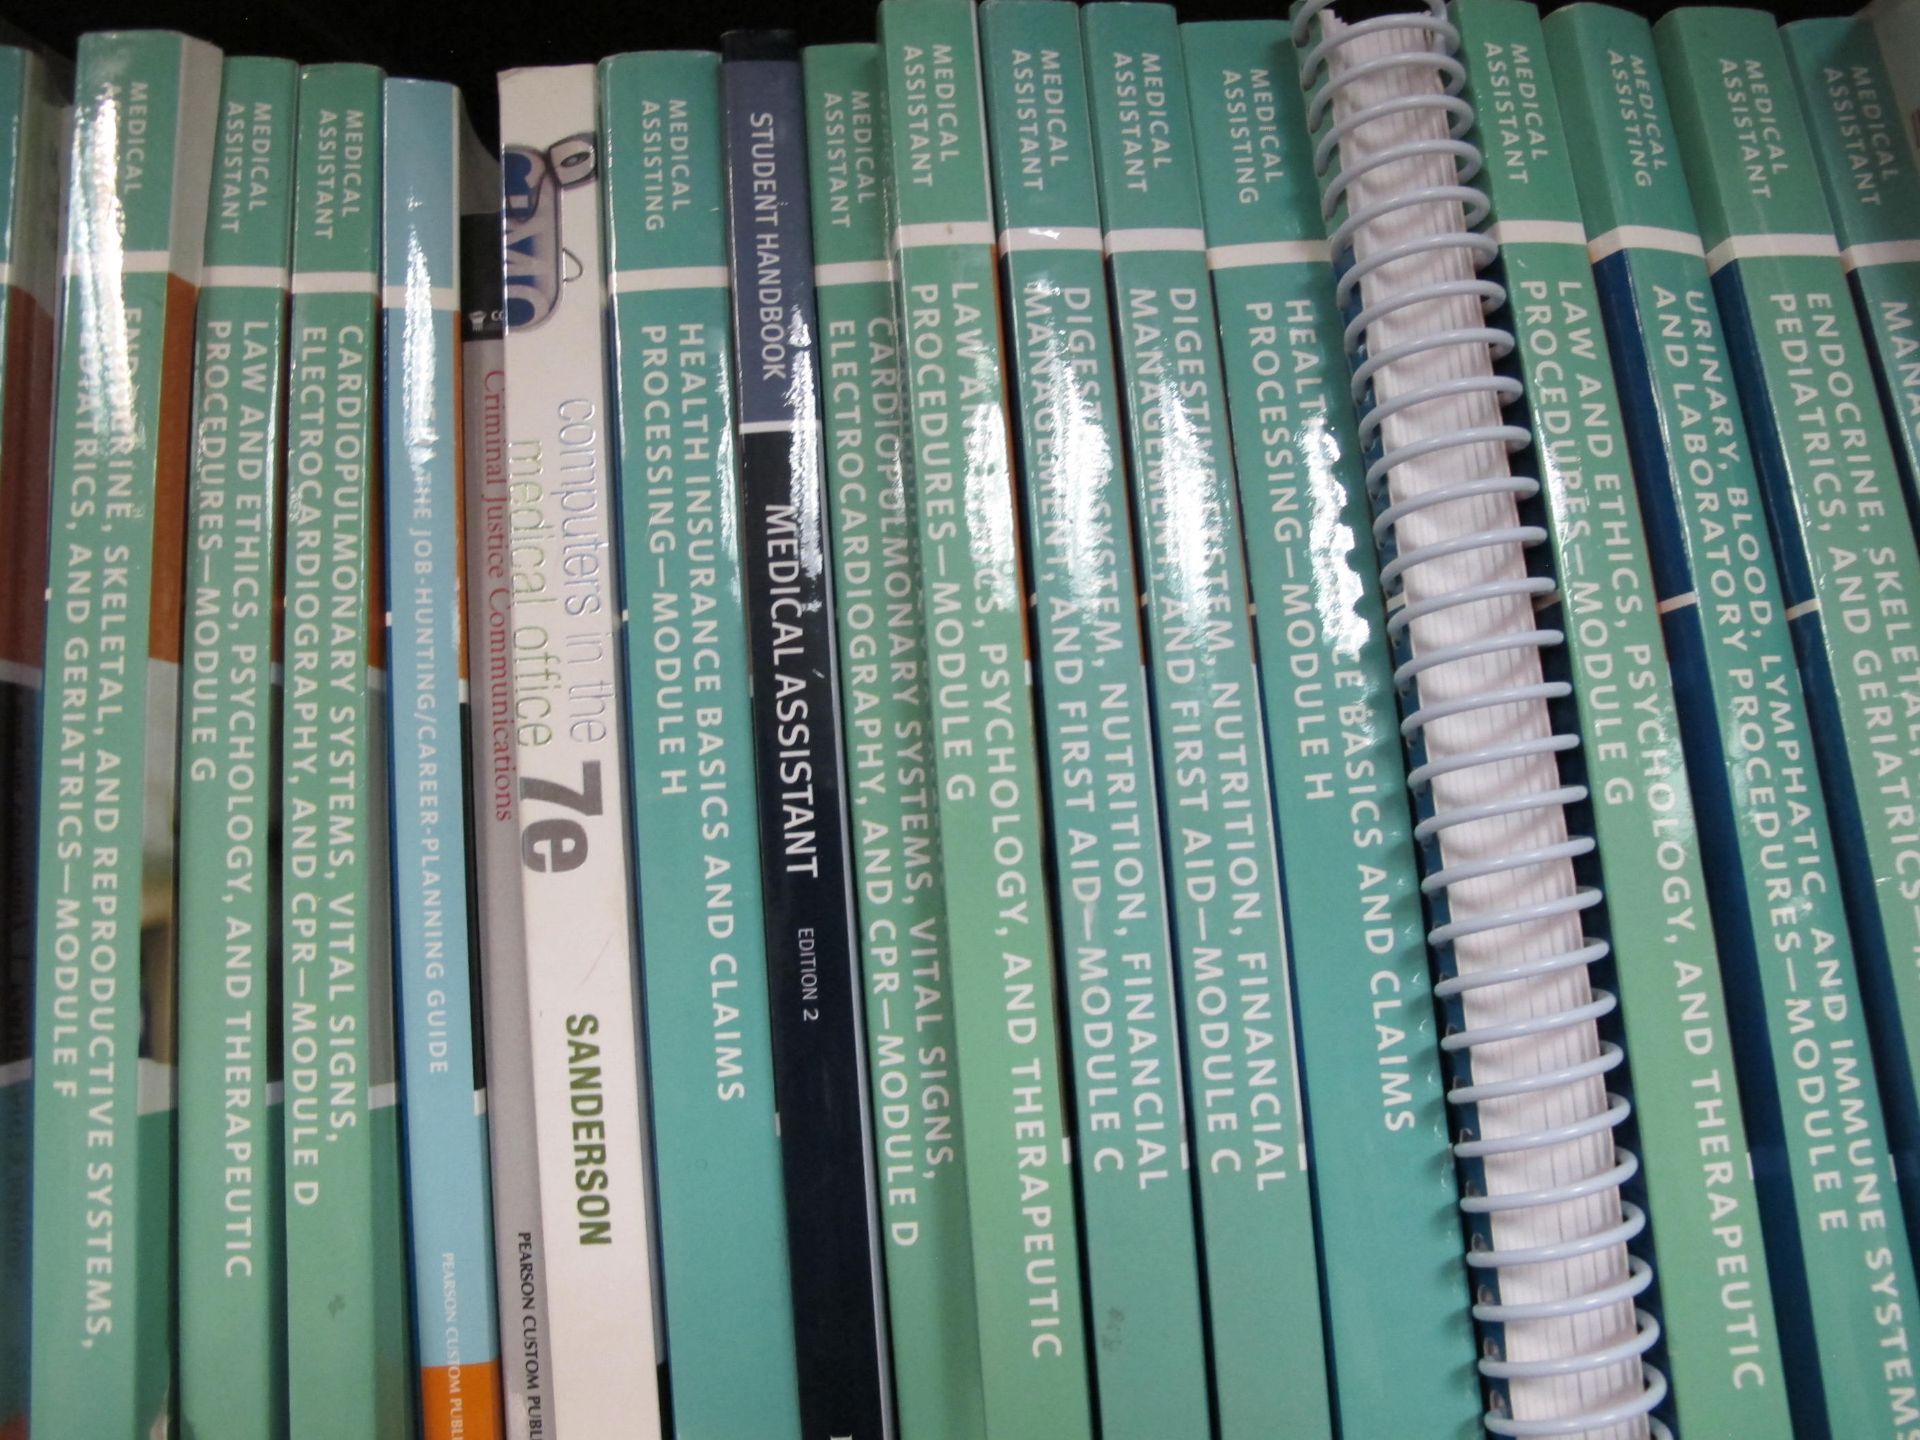 7-Shelf Metal Bookcase & Contents (Incl. Healcare, Business Computing, Reference; Instructor - Image 3 of 3